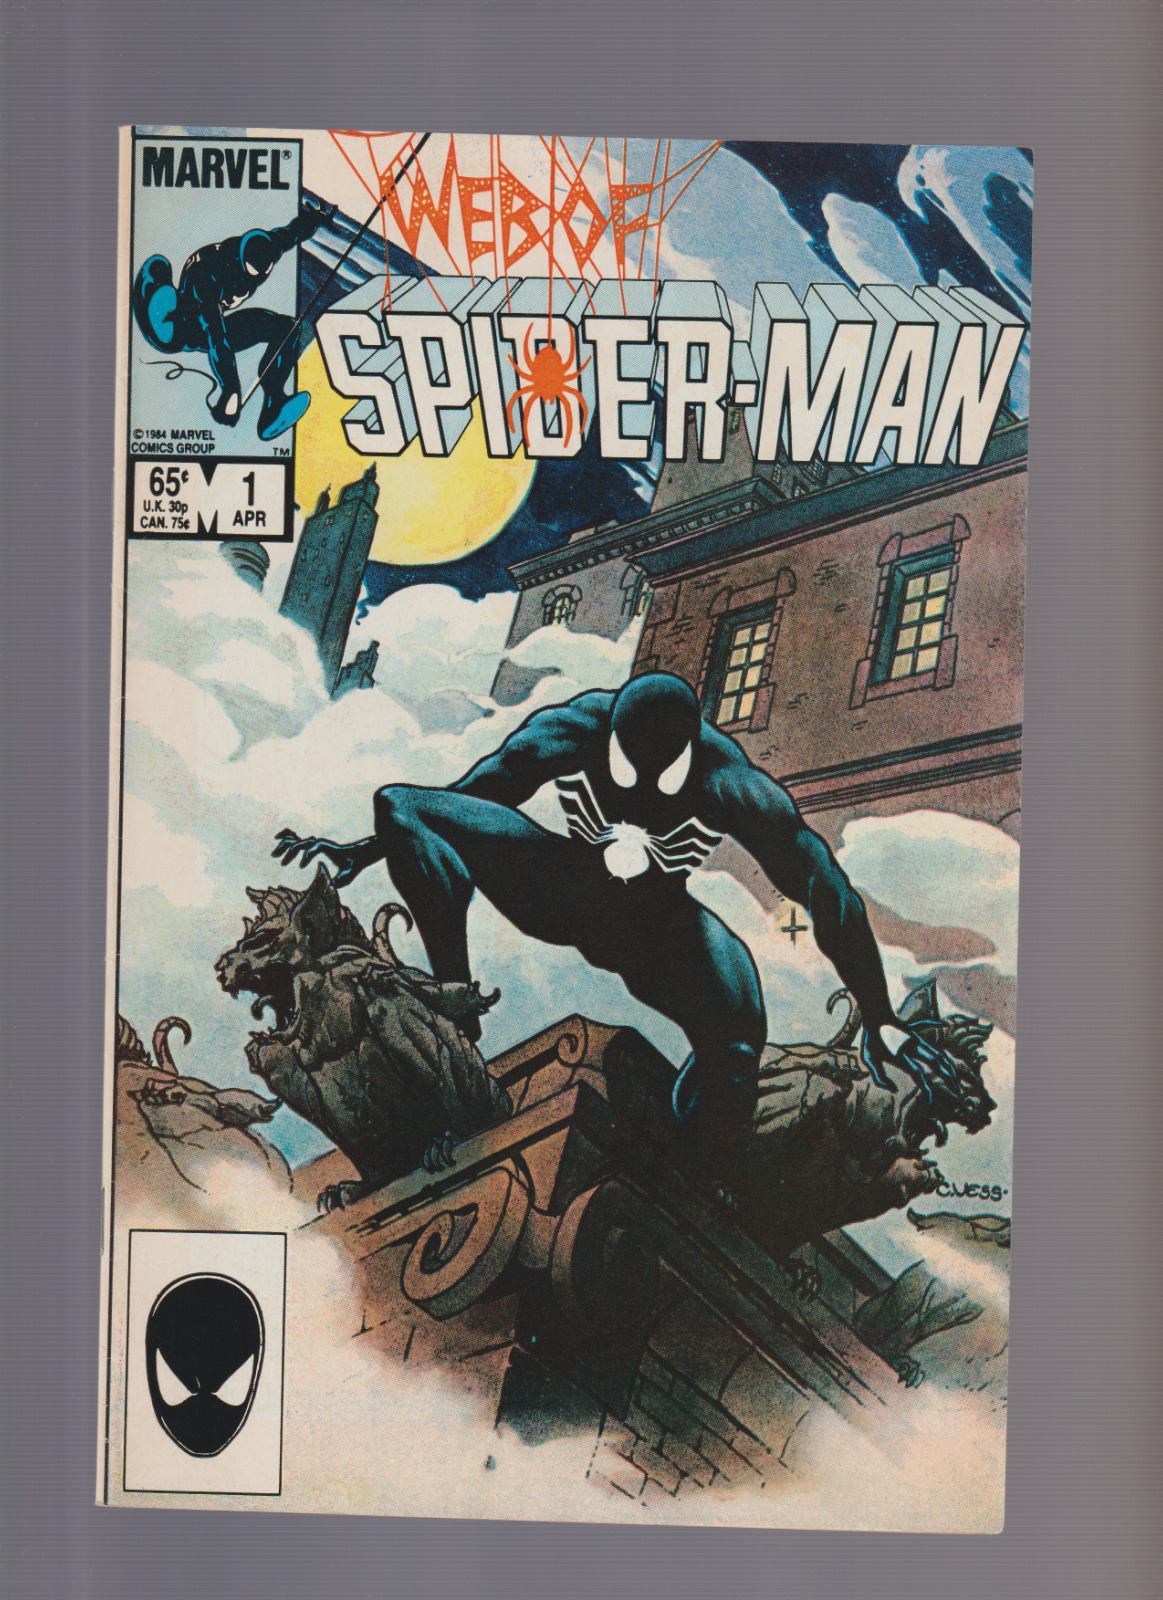 WEB OF SPIDER-MAN #1 (1984) ICONIC VESS PAINTED COVER FINAL BATTLE Symbiote